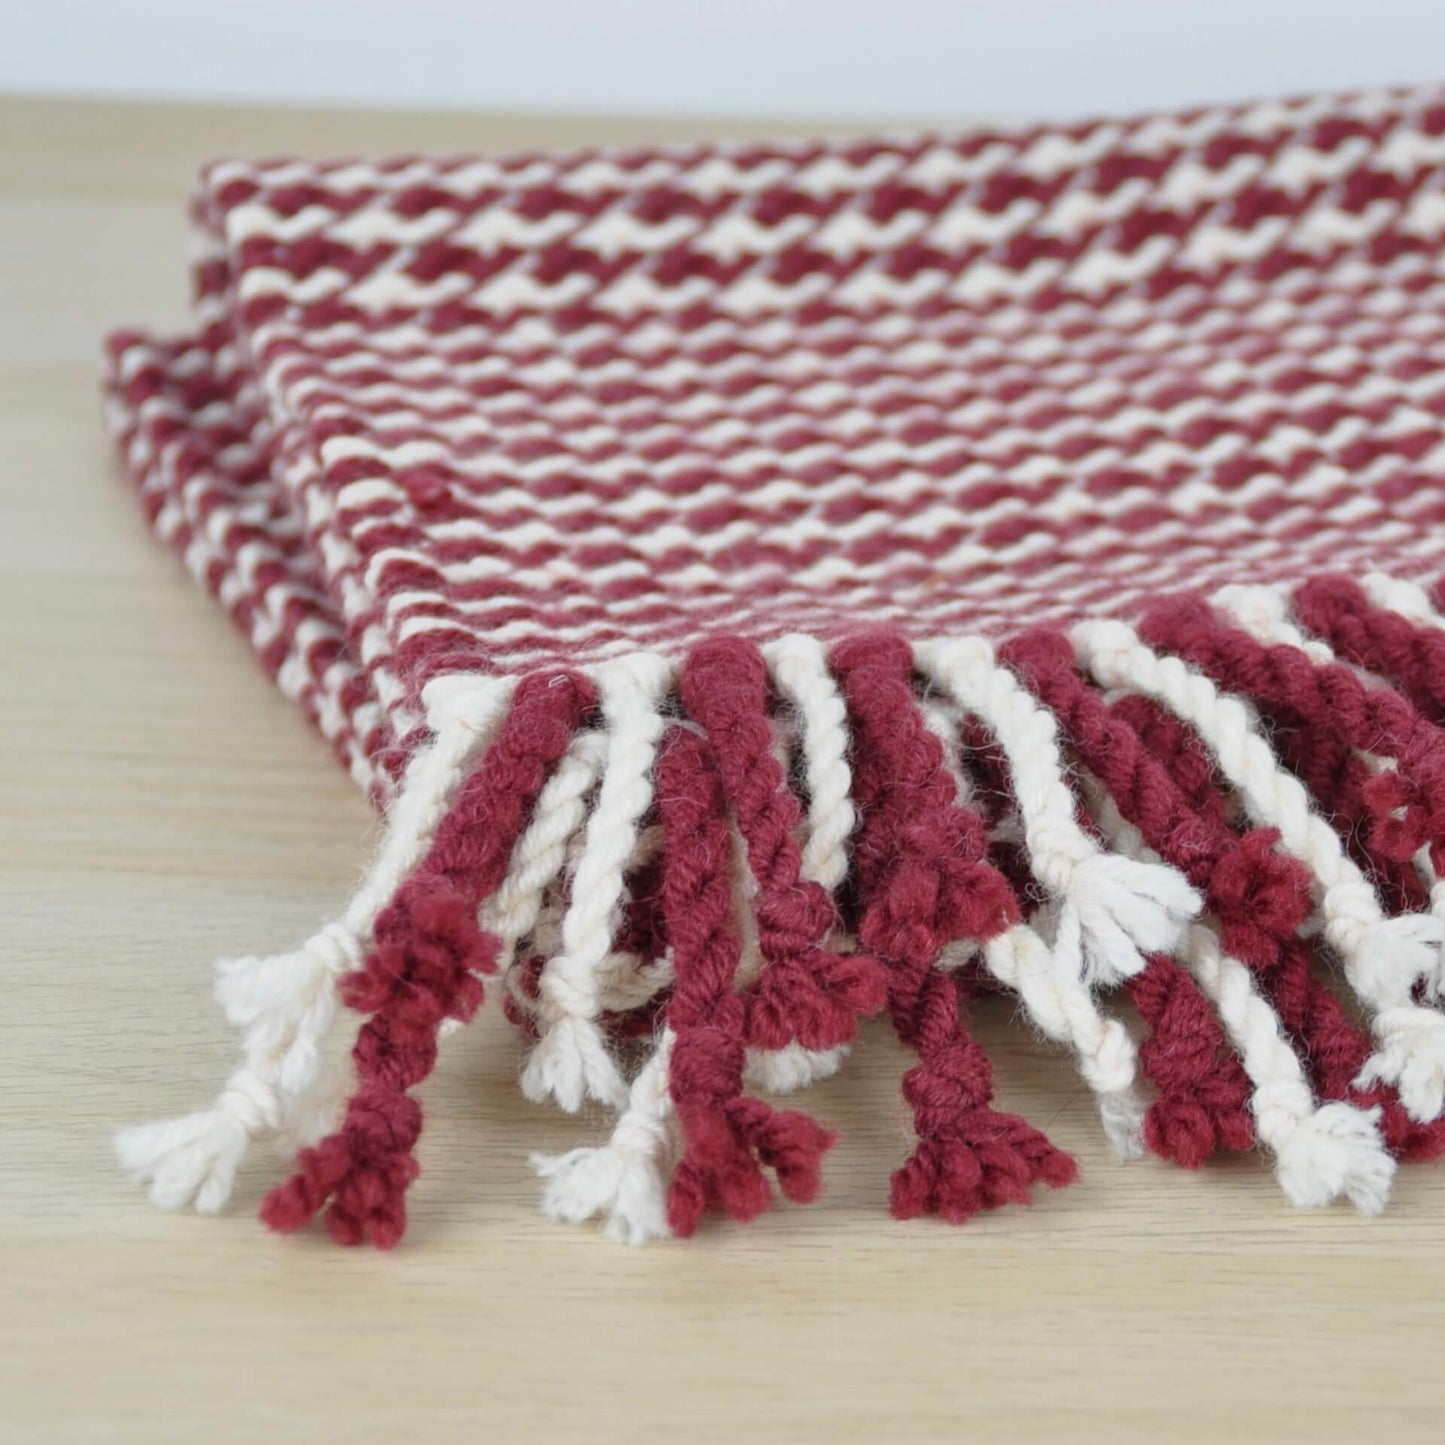 Honest Weaves Scarf Wine & White Houndstooth Handwoven Scarf